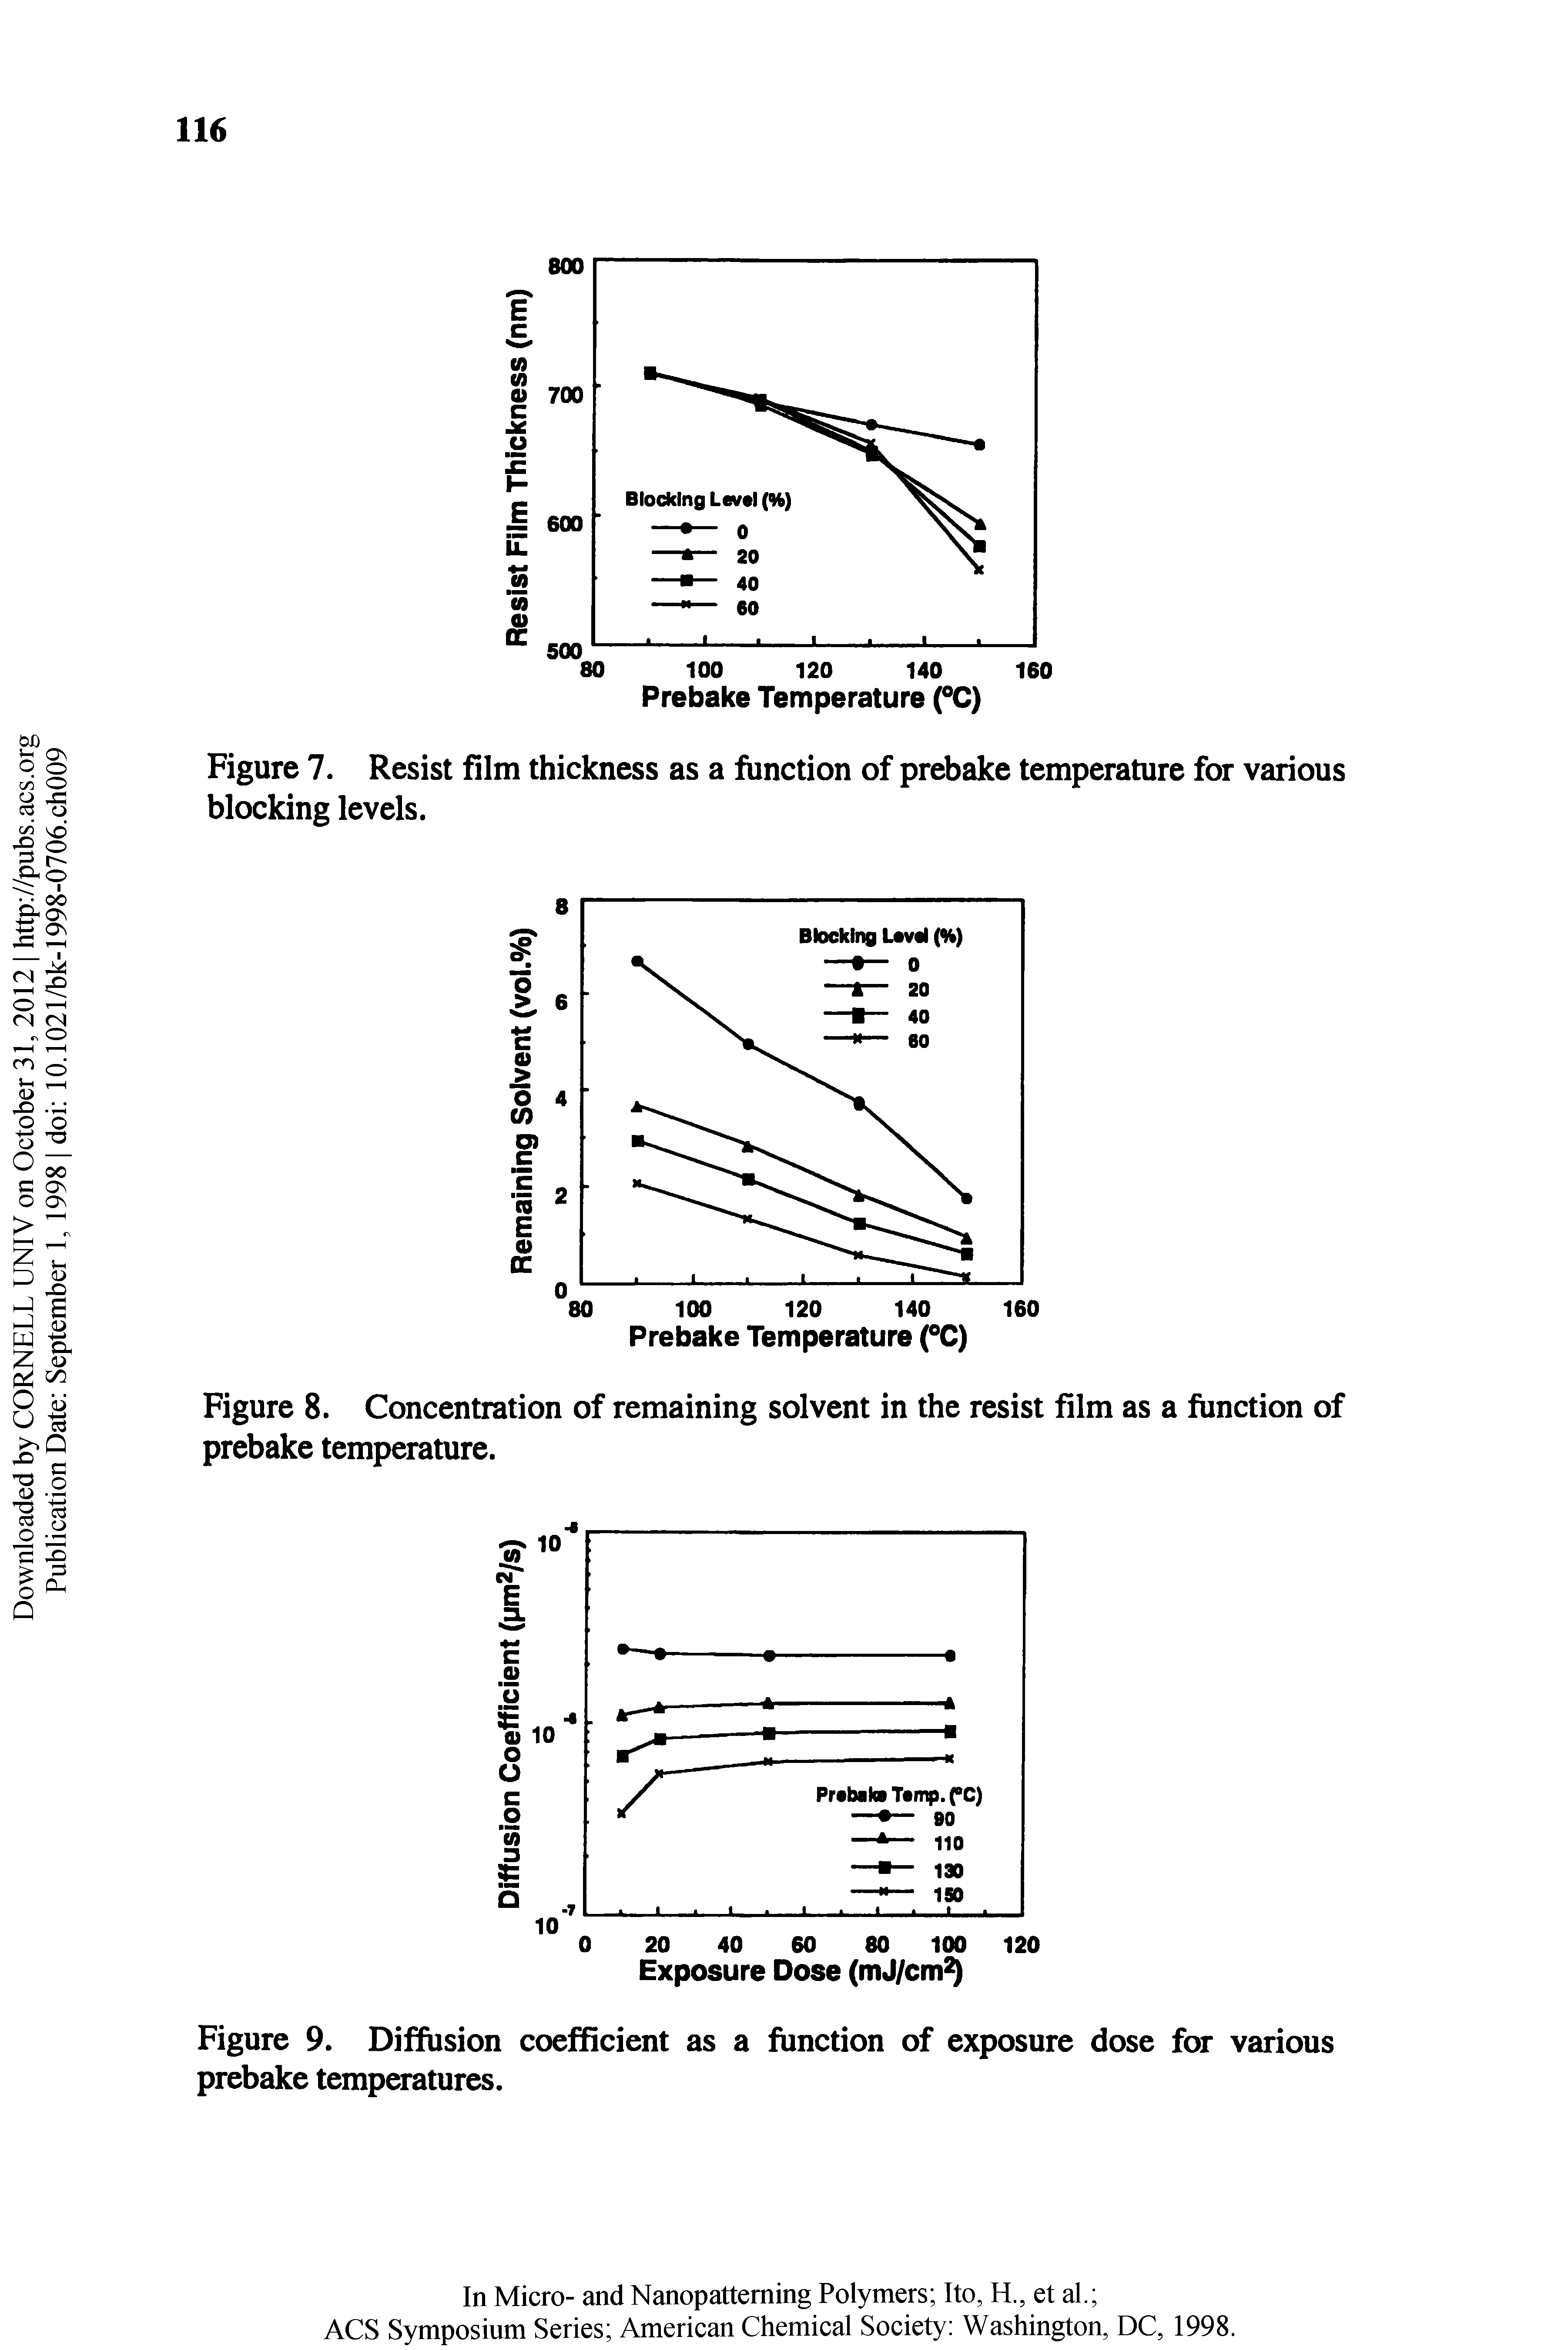 Figure 7. Resist film thickness as a function of prebake temperature for various blocking levels.